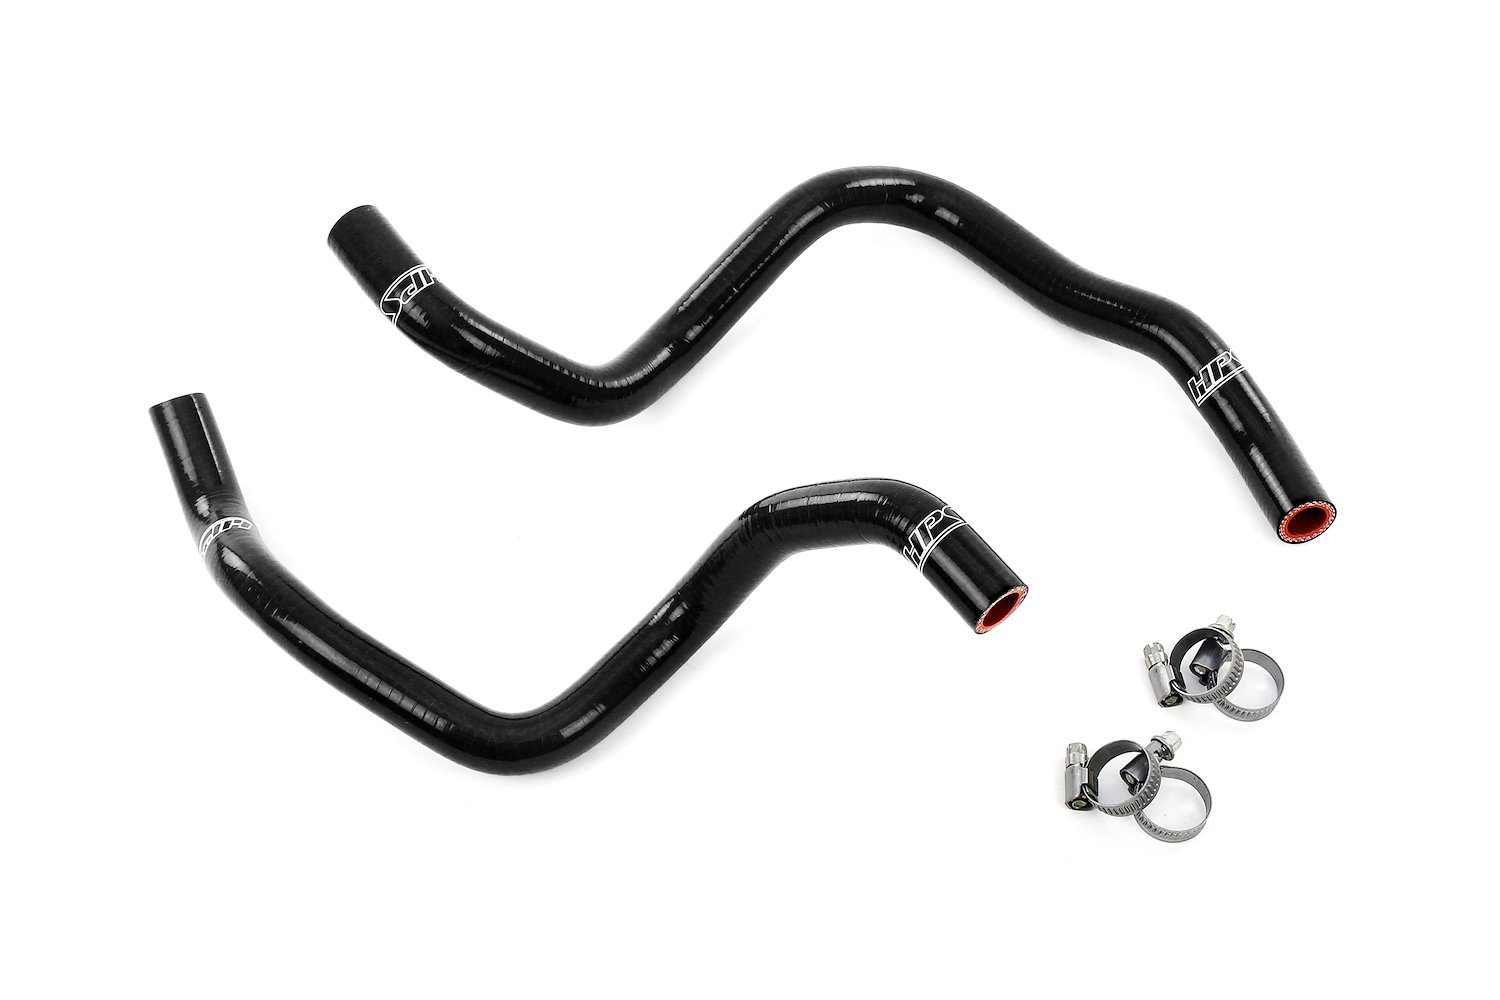 57-2108-BLK Heater Hose Kit, 3-Ply Reinforced Silicone, Replaces Rubber Heater Coolant Hoses